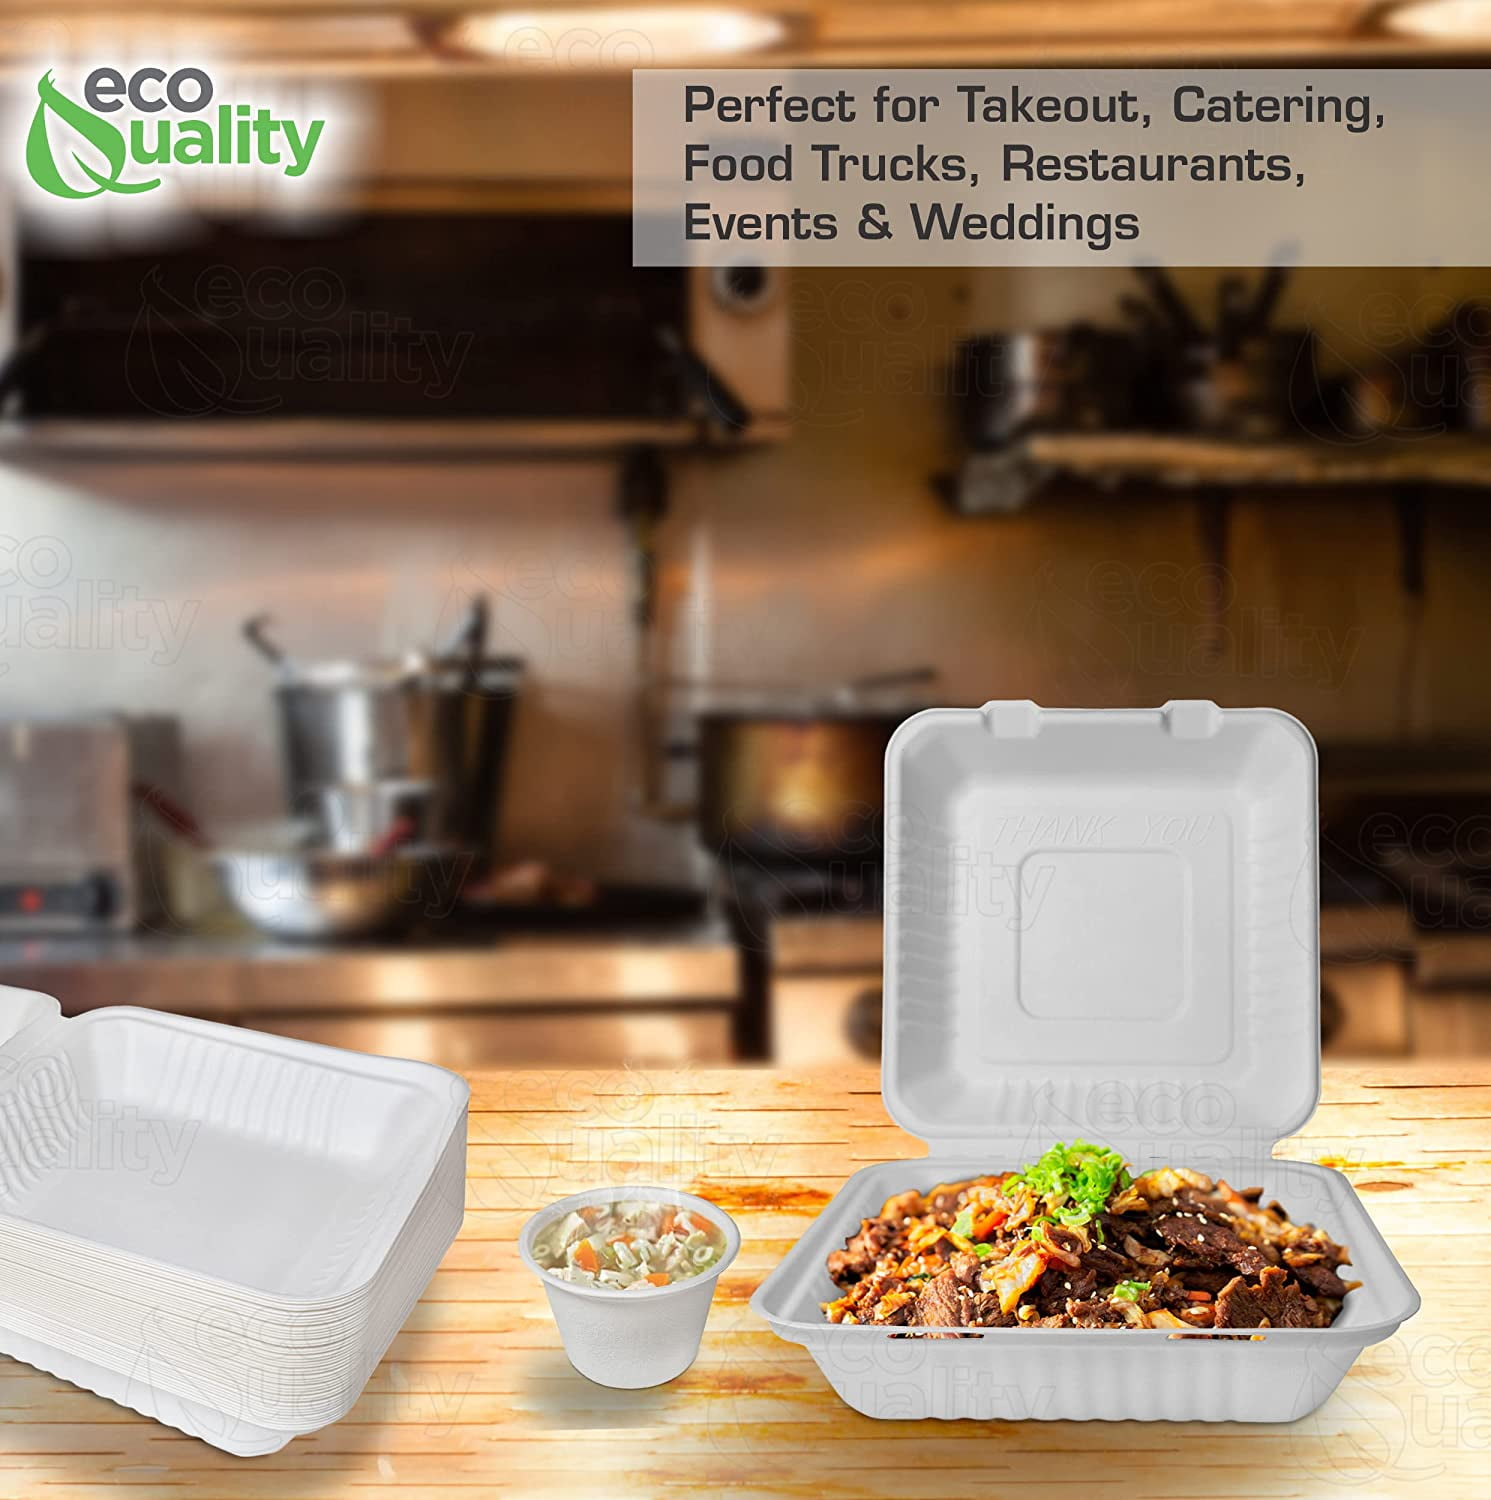 Compostable 2 Compartment Square Hinged Clamshell Take Out Food Containers 9x6x3 - Heavy Duty Quality Disposable to Go Containers, Eco-Friendly 